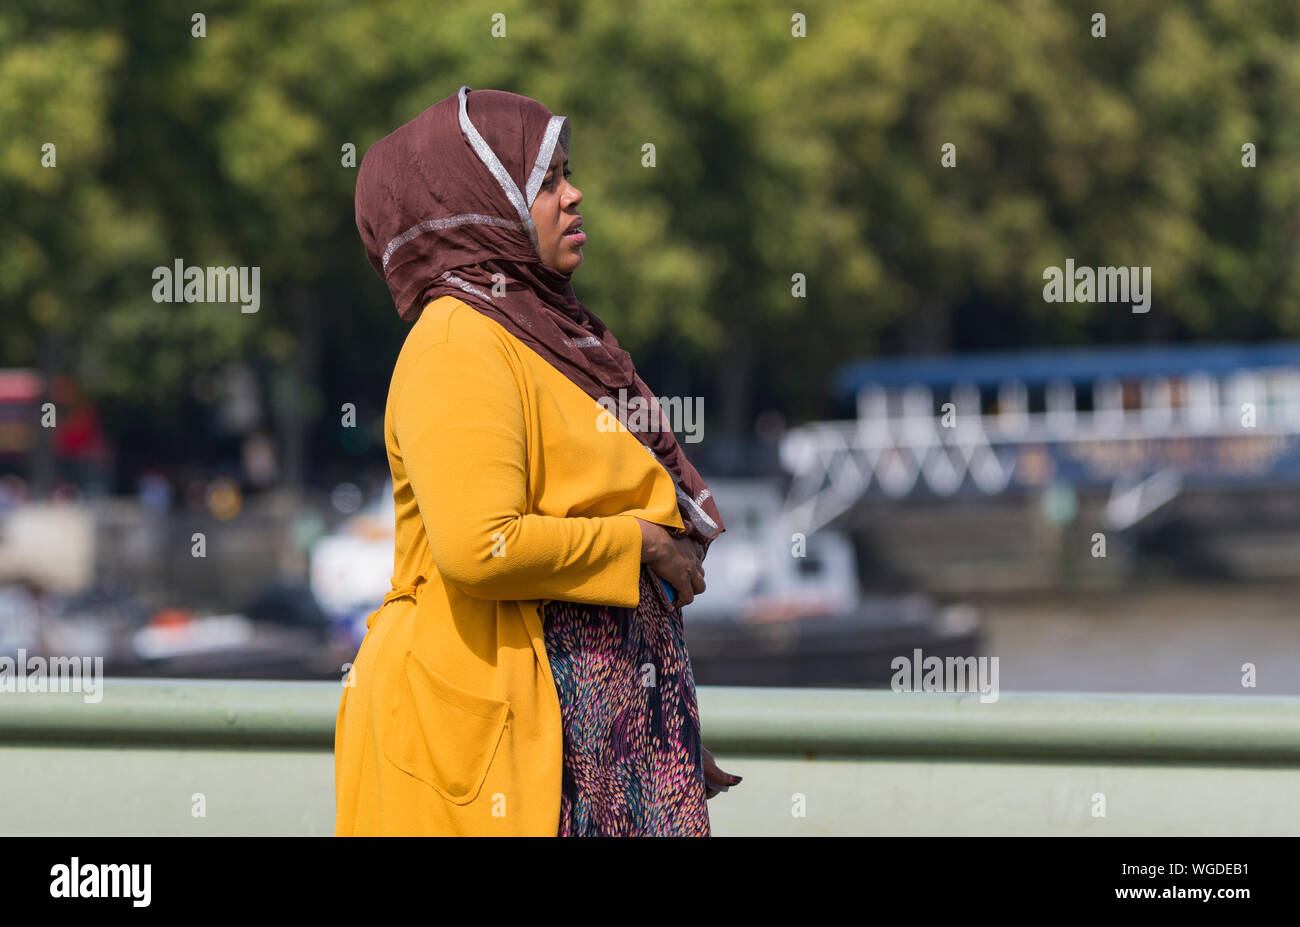 Side view of a young woman, possibly Middle Eastern, wearing a hijab headscarf or head covering often worn by Muslim women in Summer in London, UK. Stock Photo